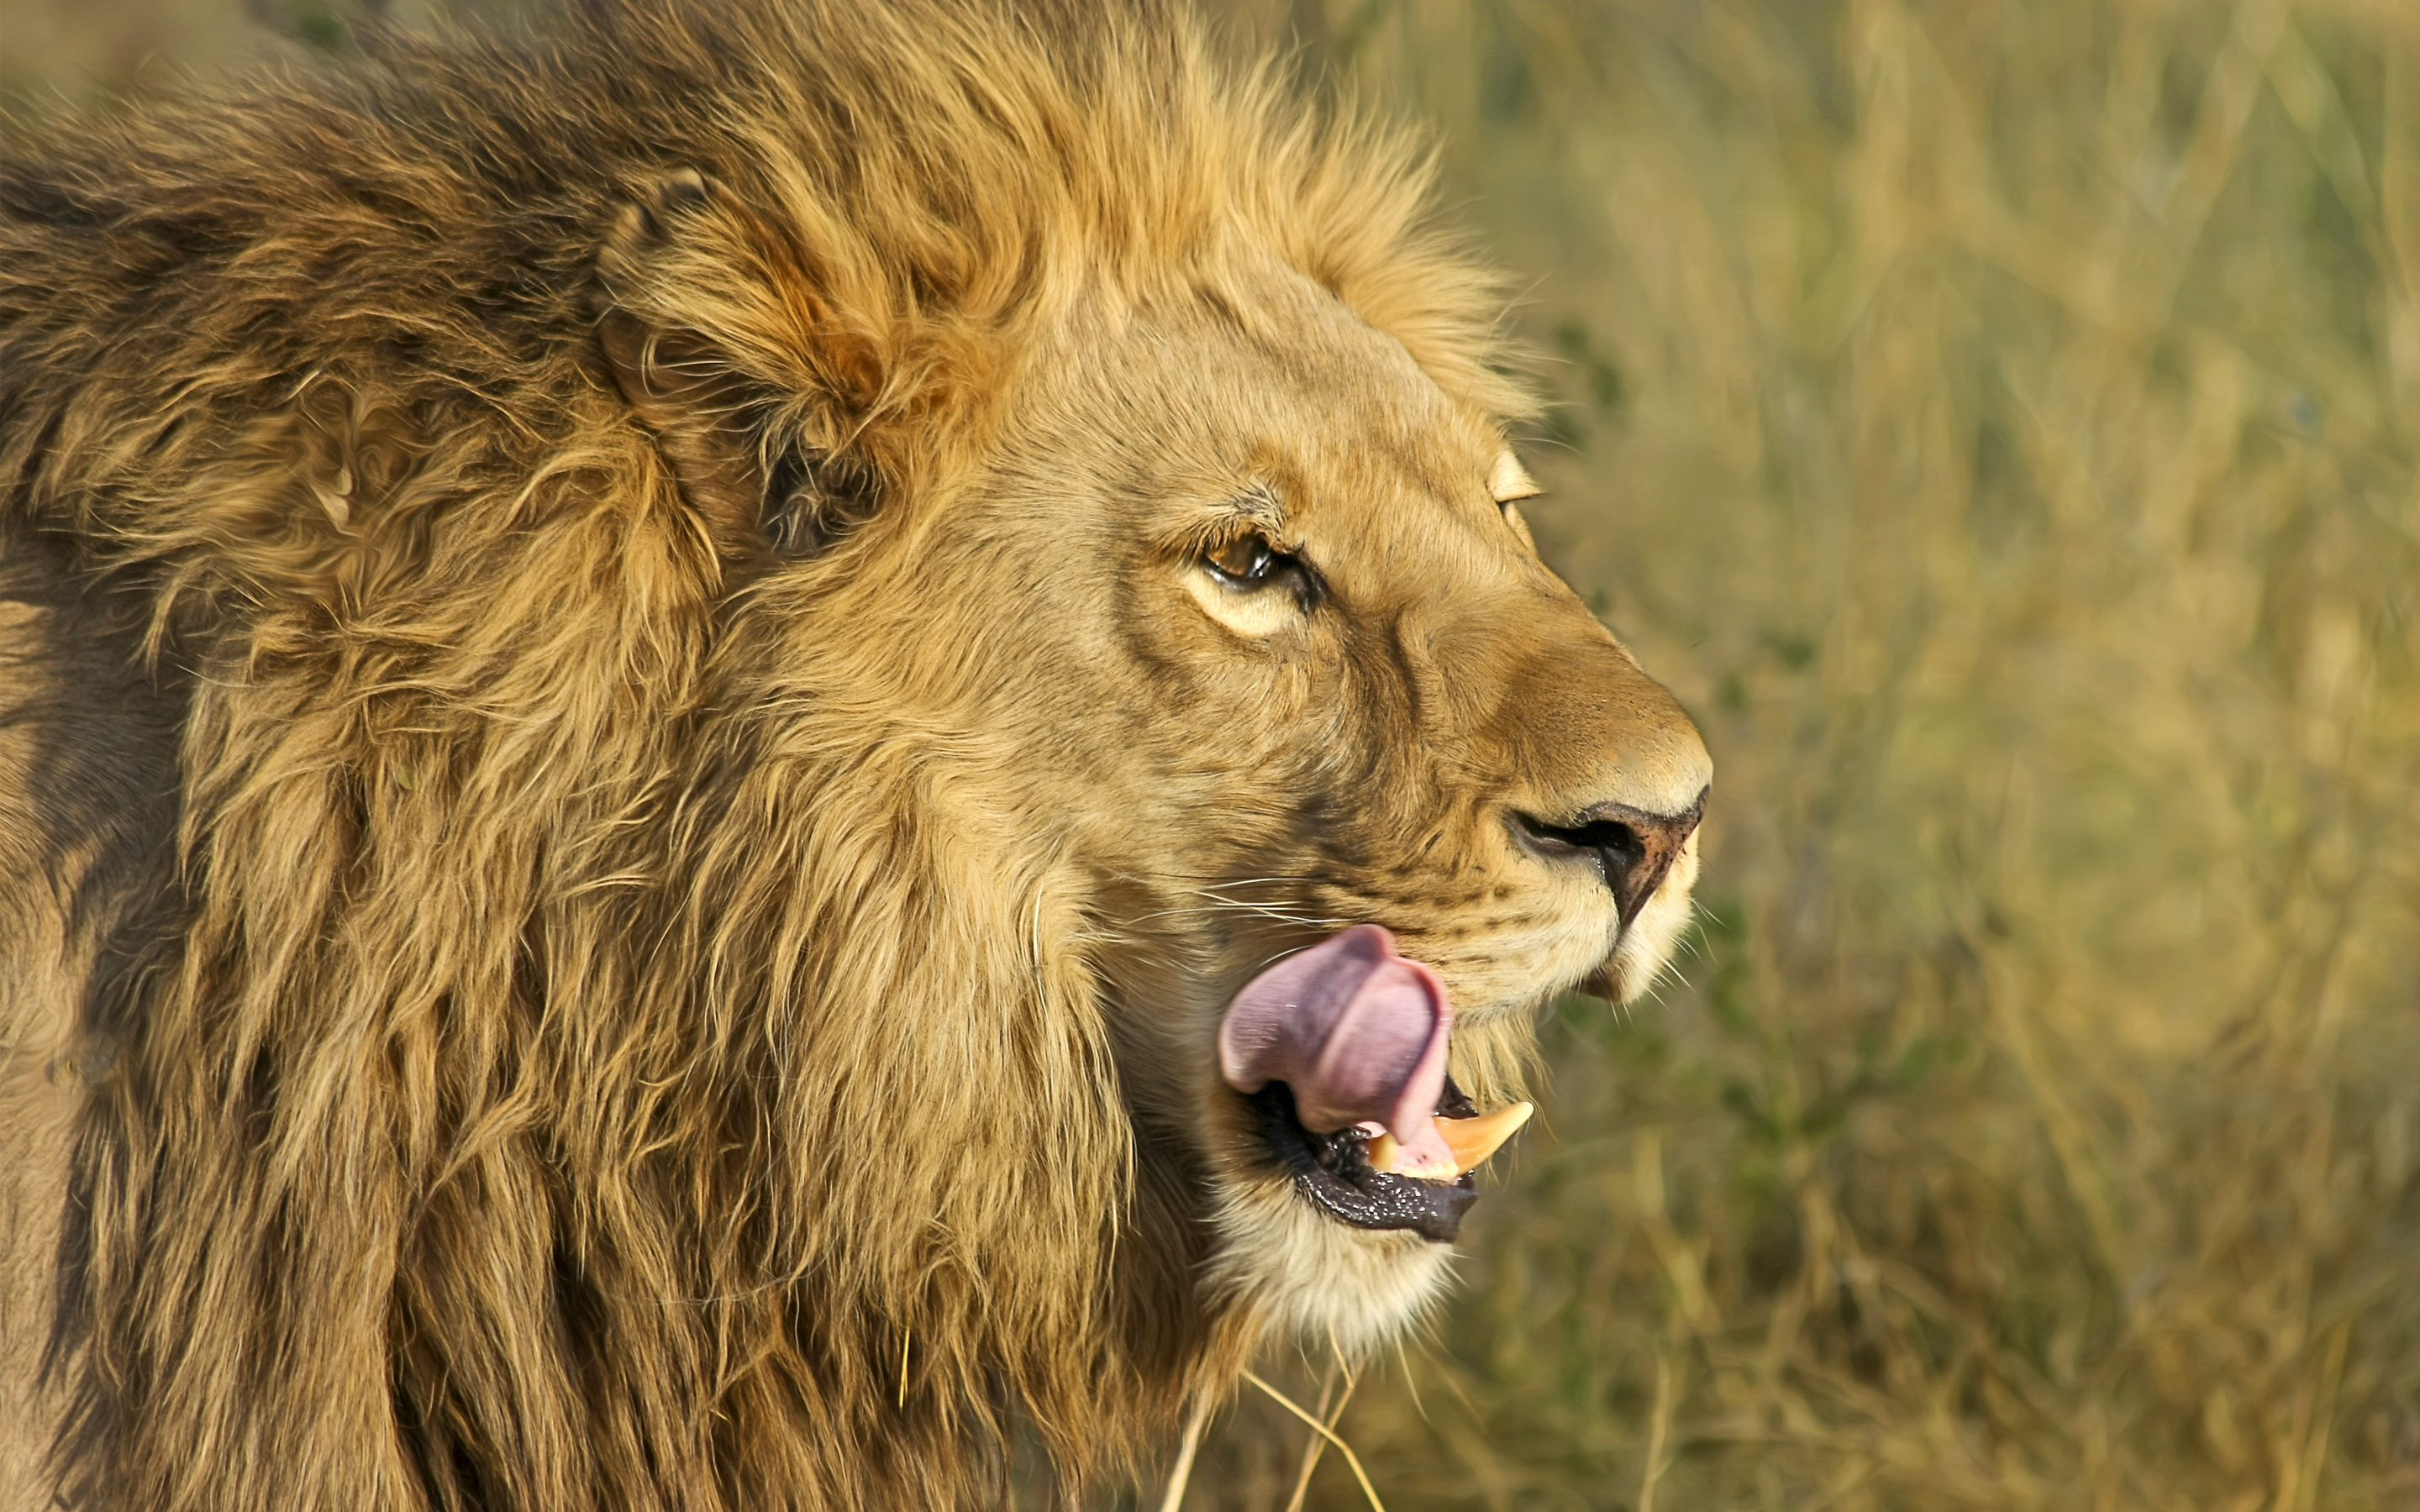 South African Lion616268617 - South African Lion - Tiger, South, Lion, African